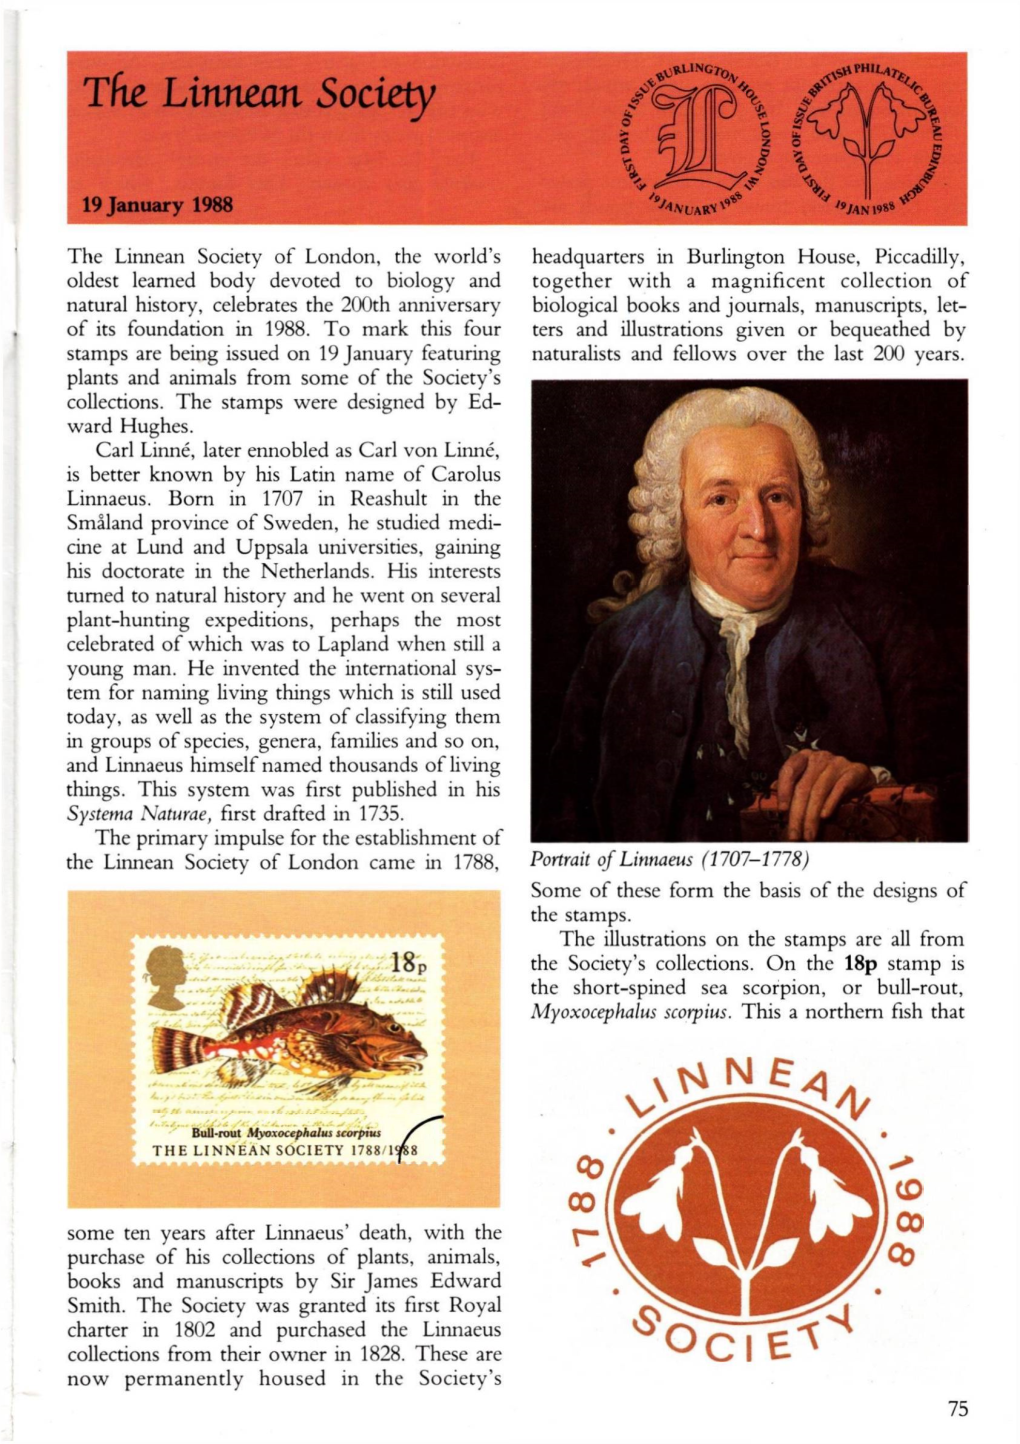 Issue the Linnean Society